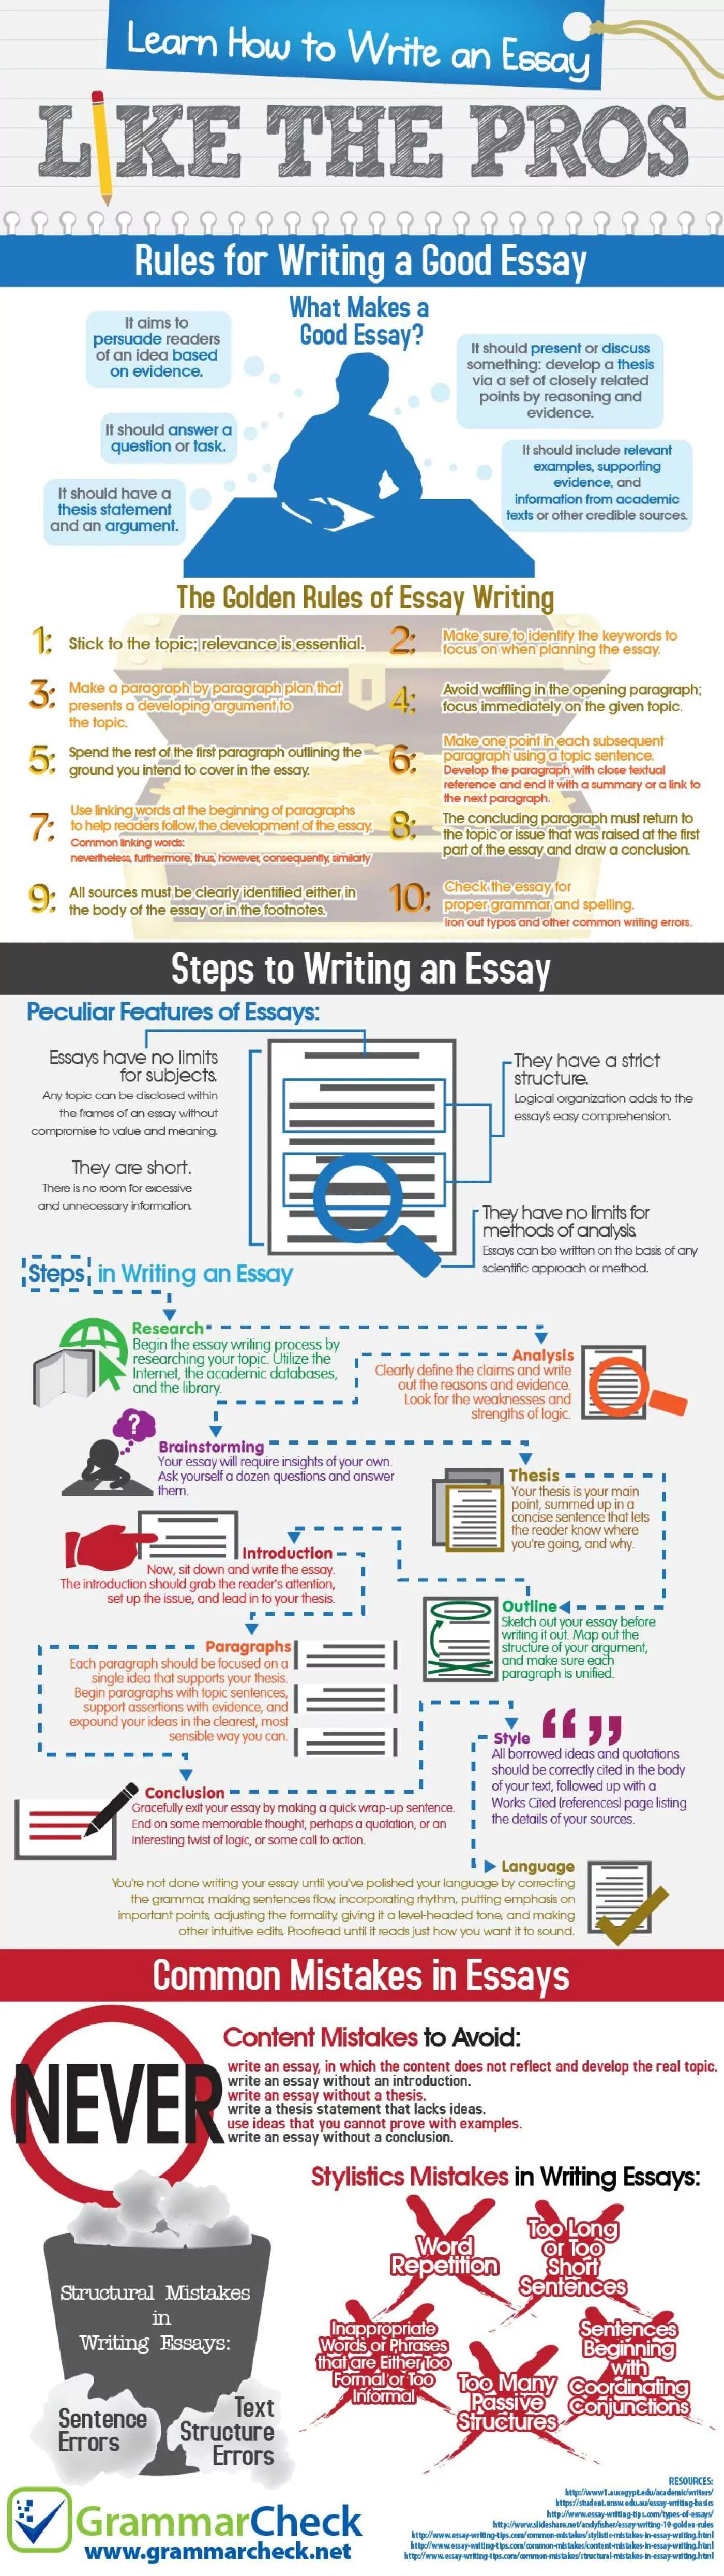 How To Write An Essay Like The Pros Infographic